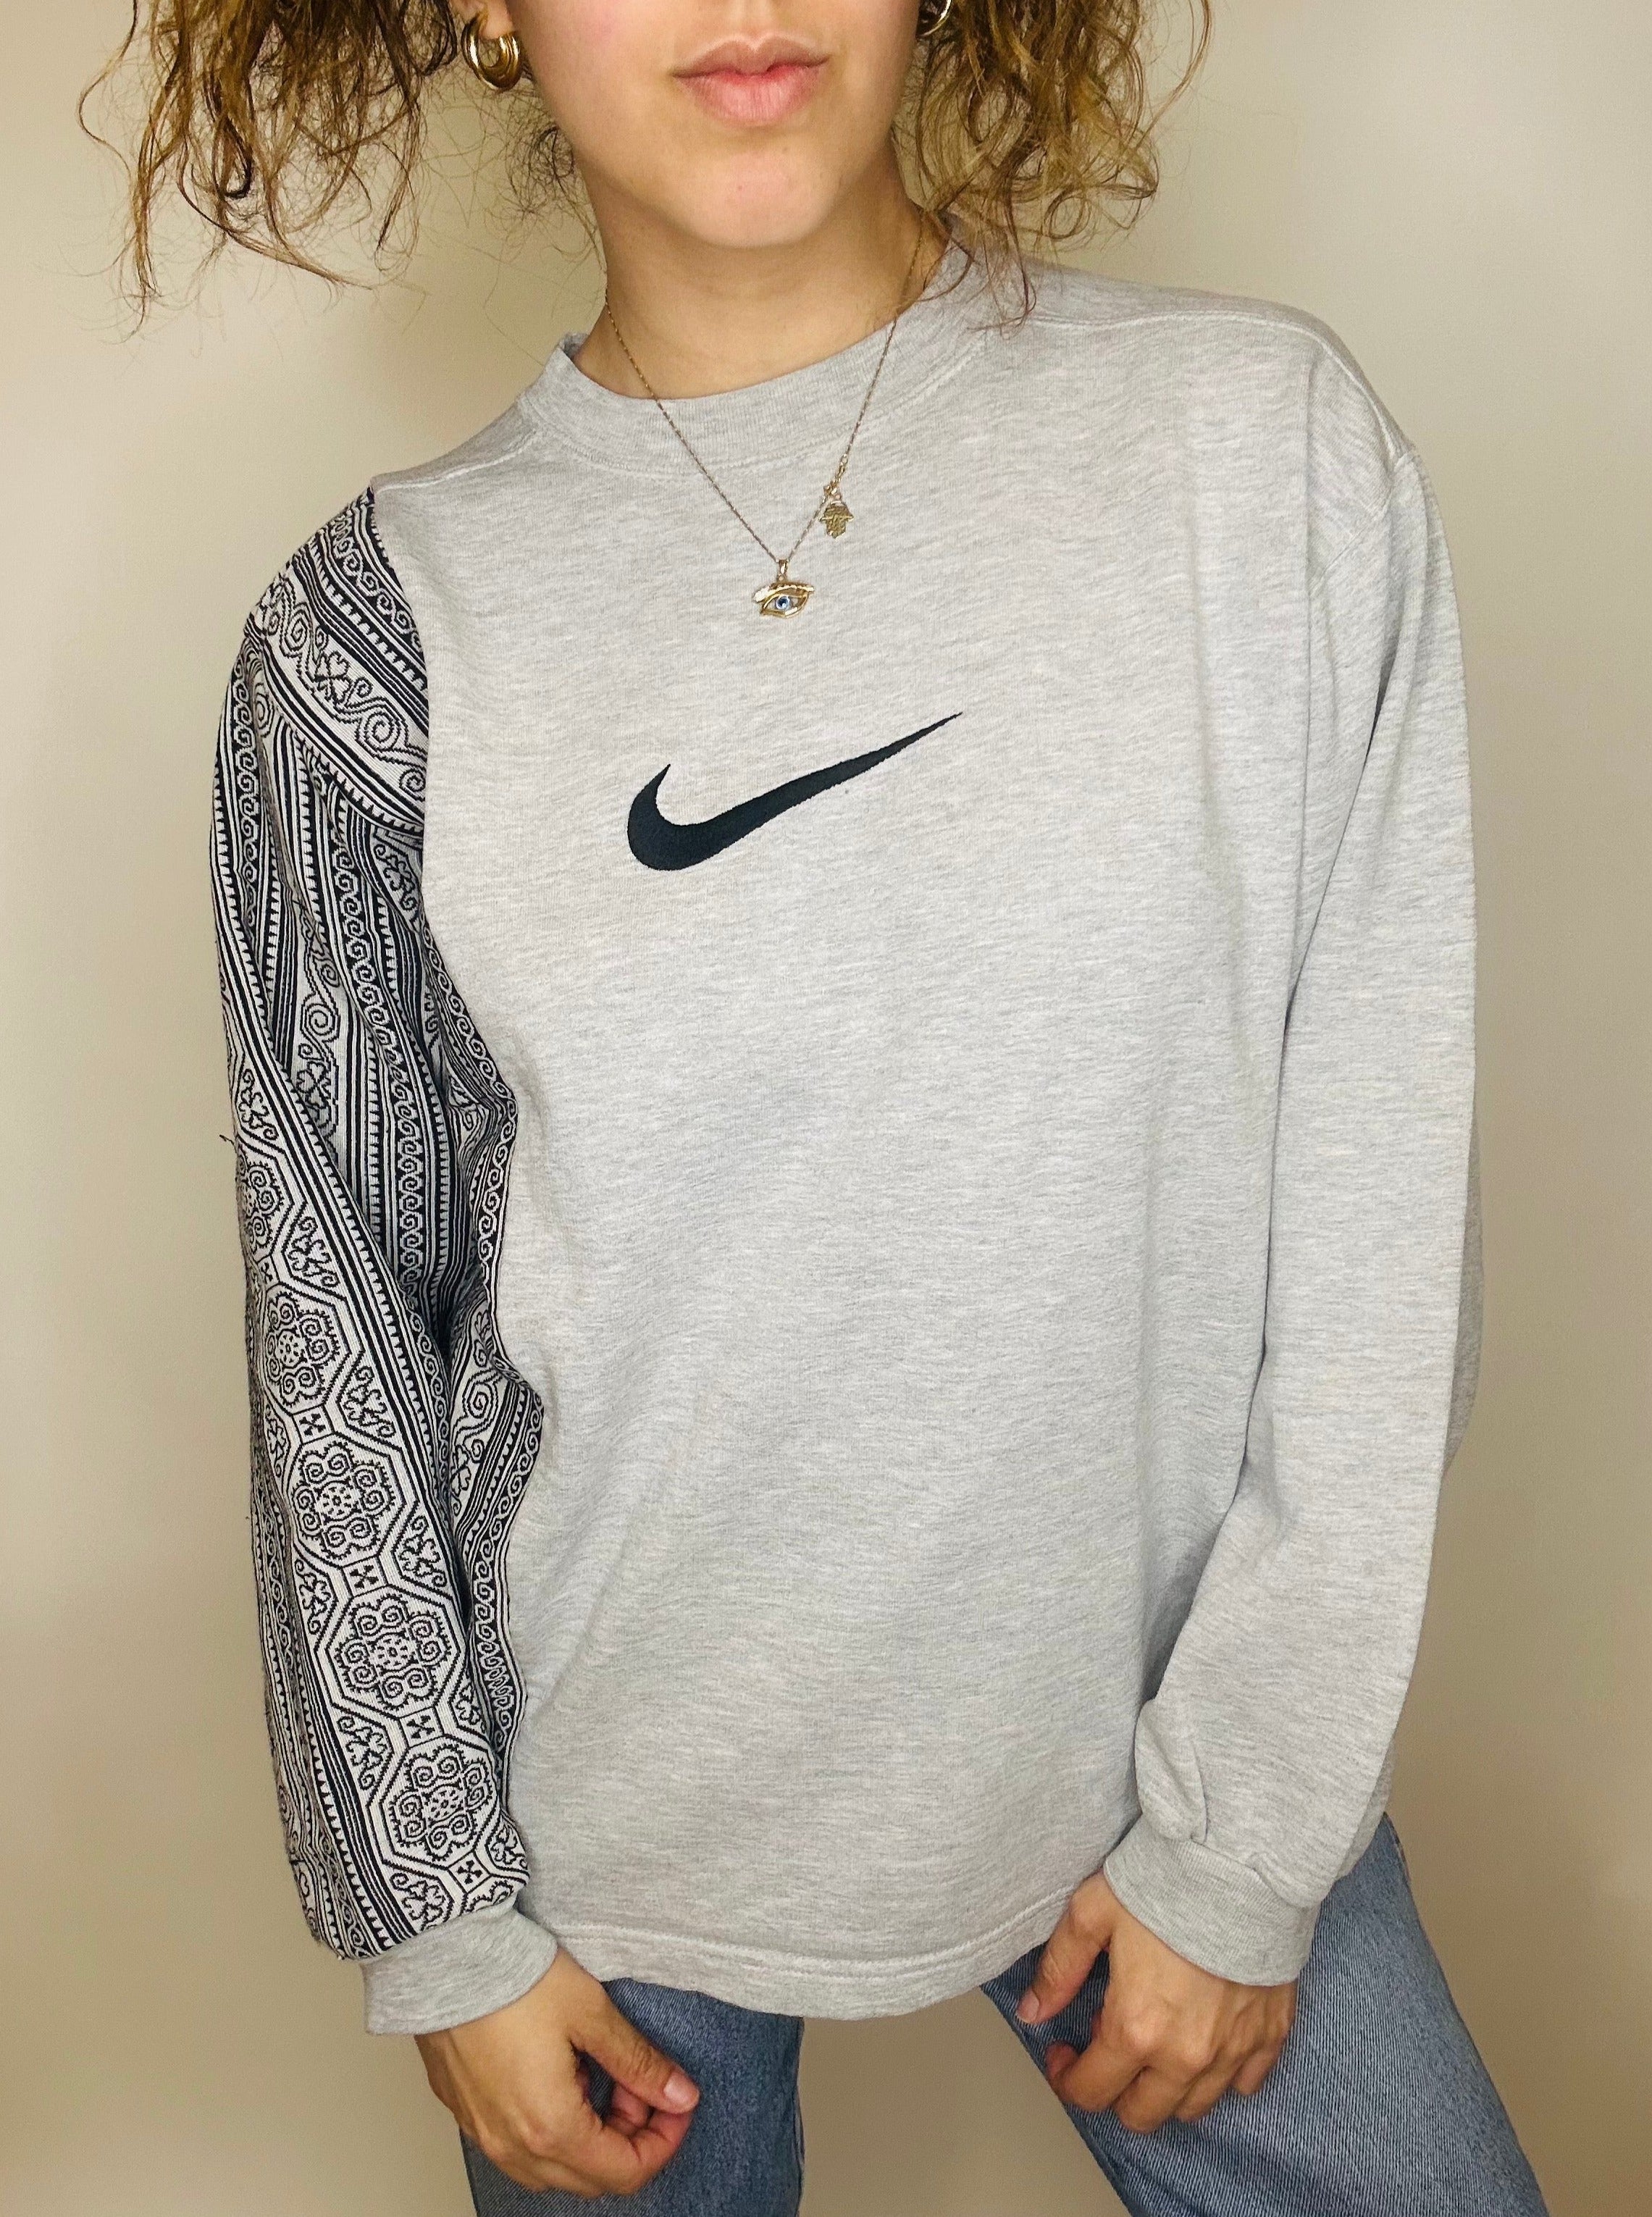 lustre ilt kimplante Reworked Nike Sweater - From The Soul